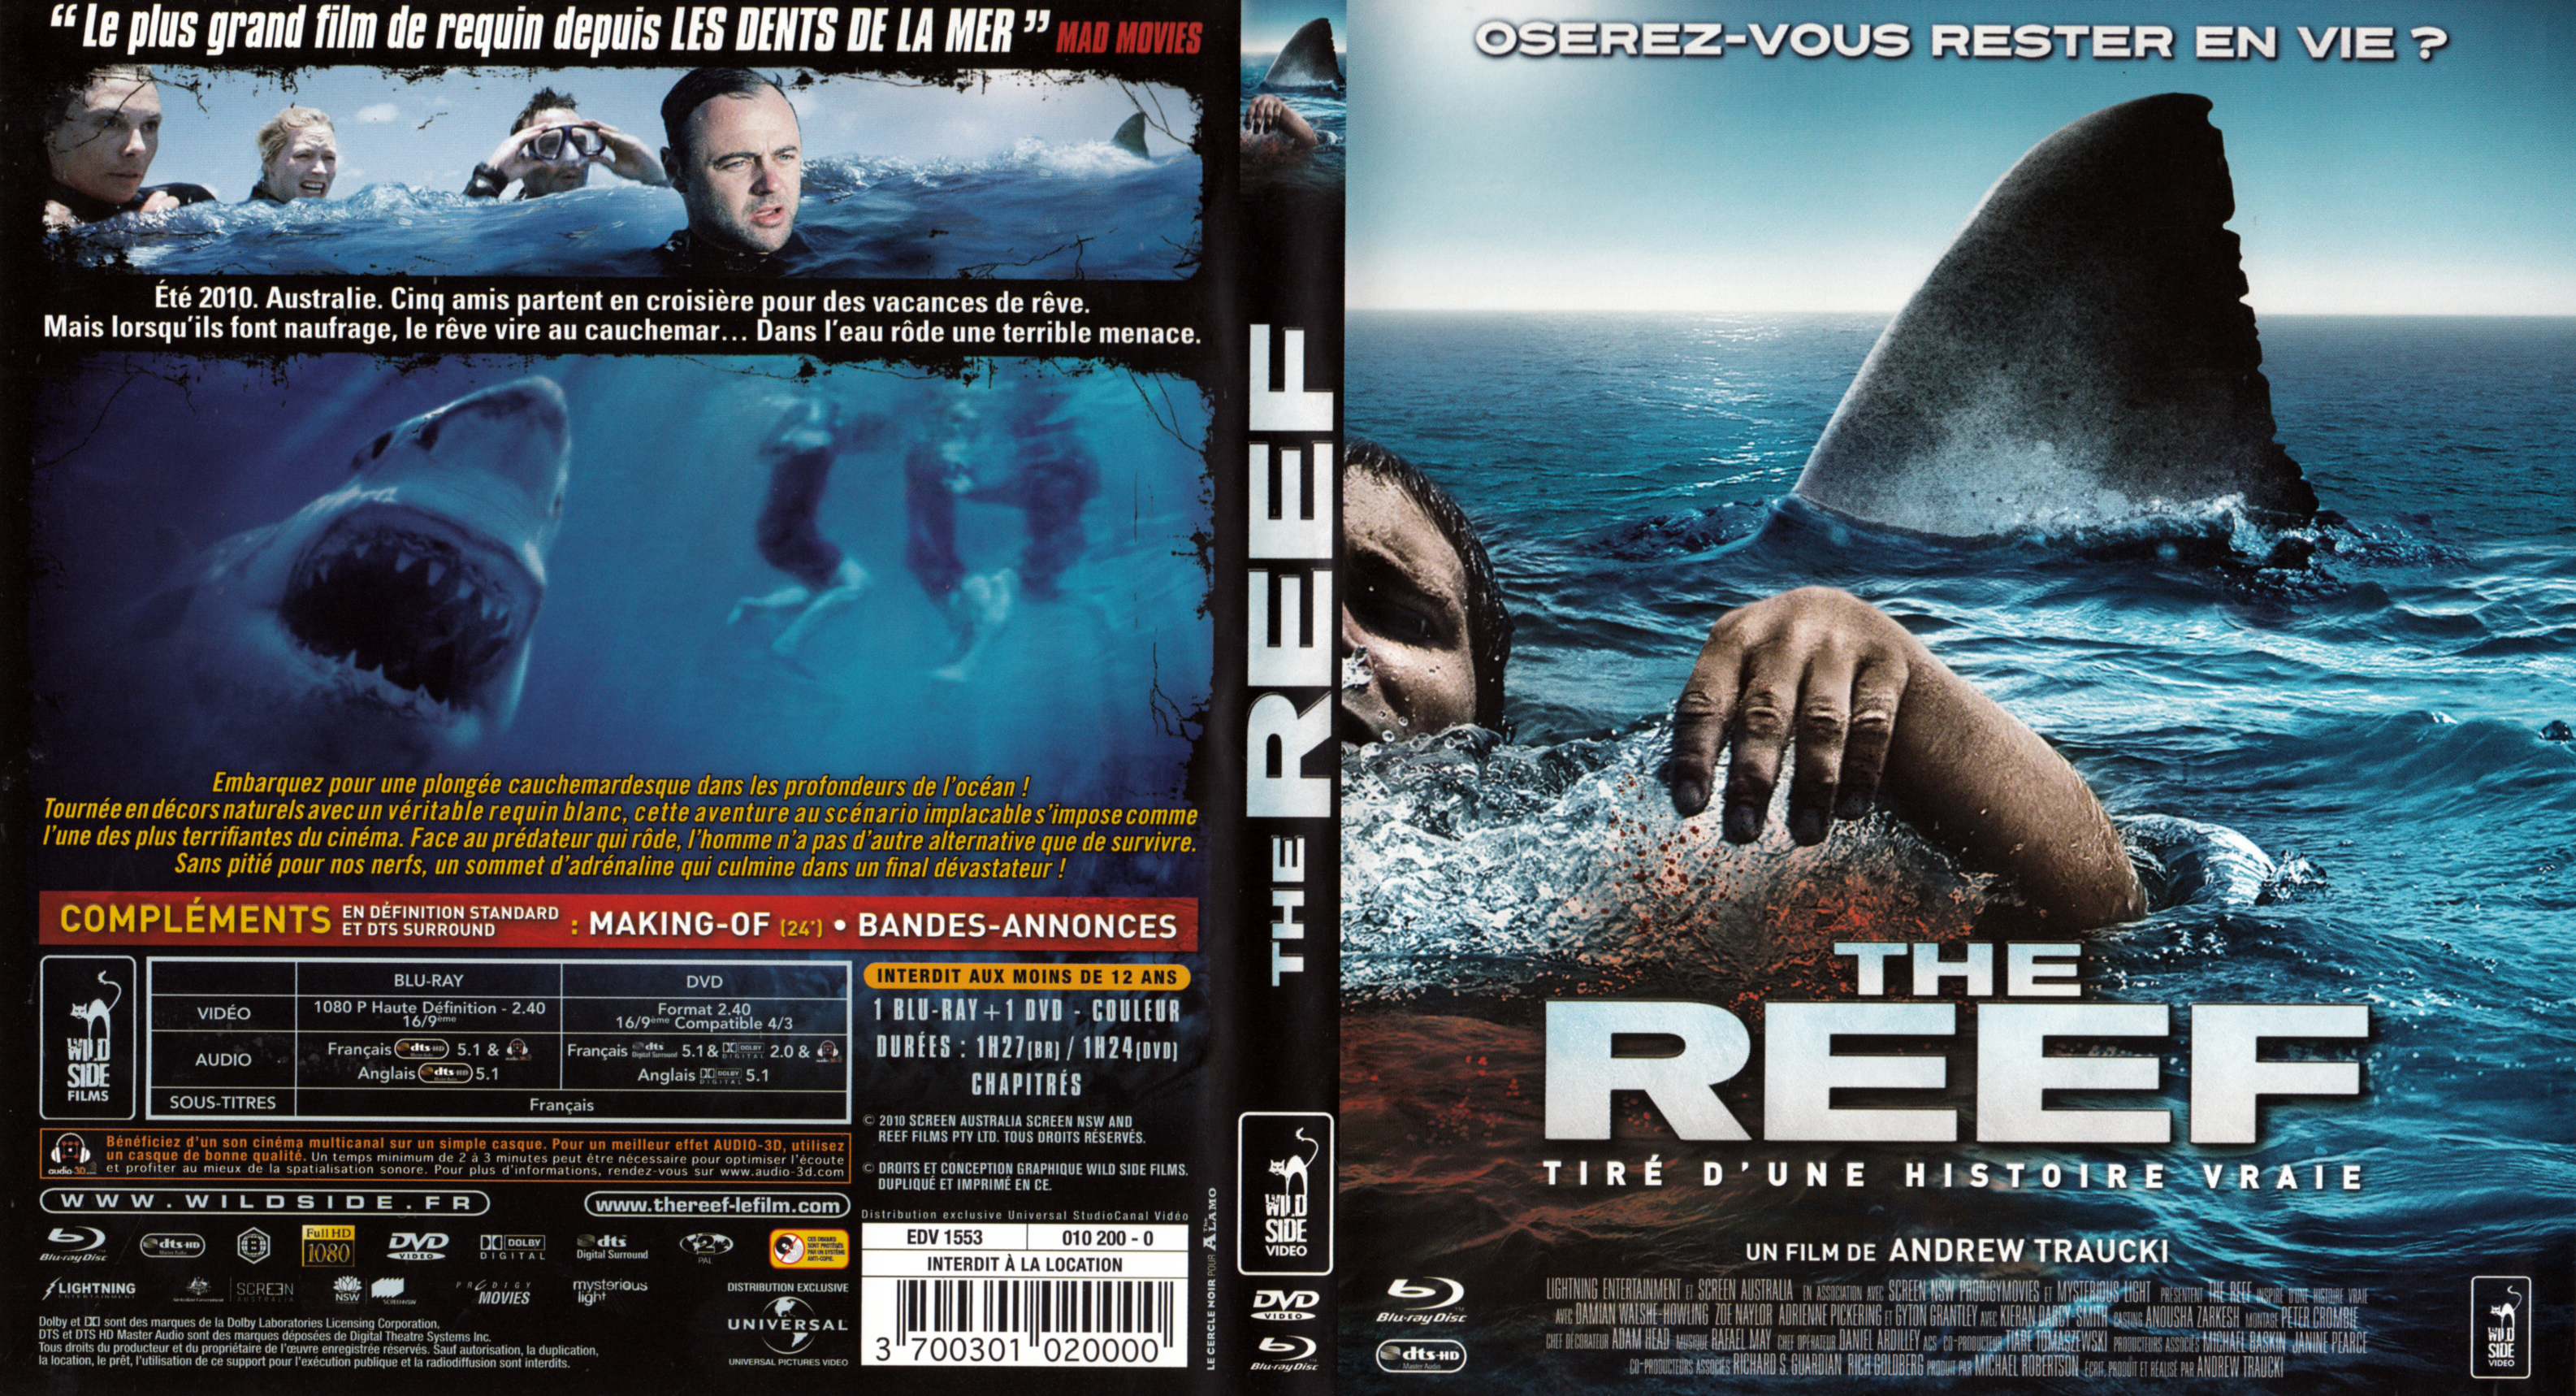 Jaquette DVD The reef (BLU-RAY)